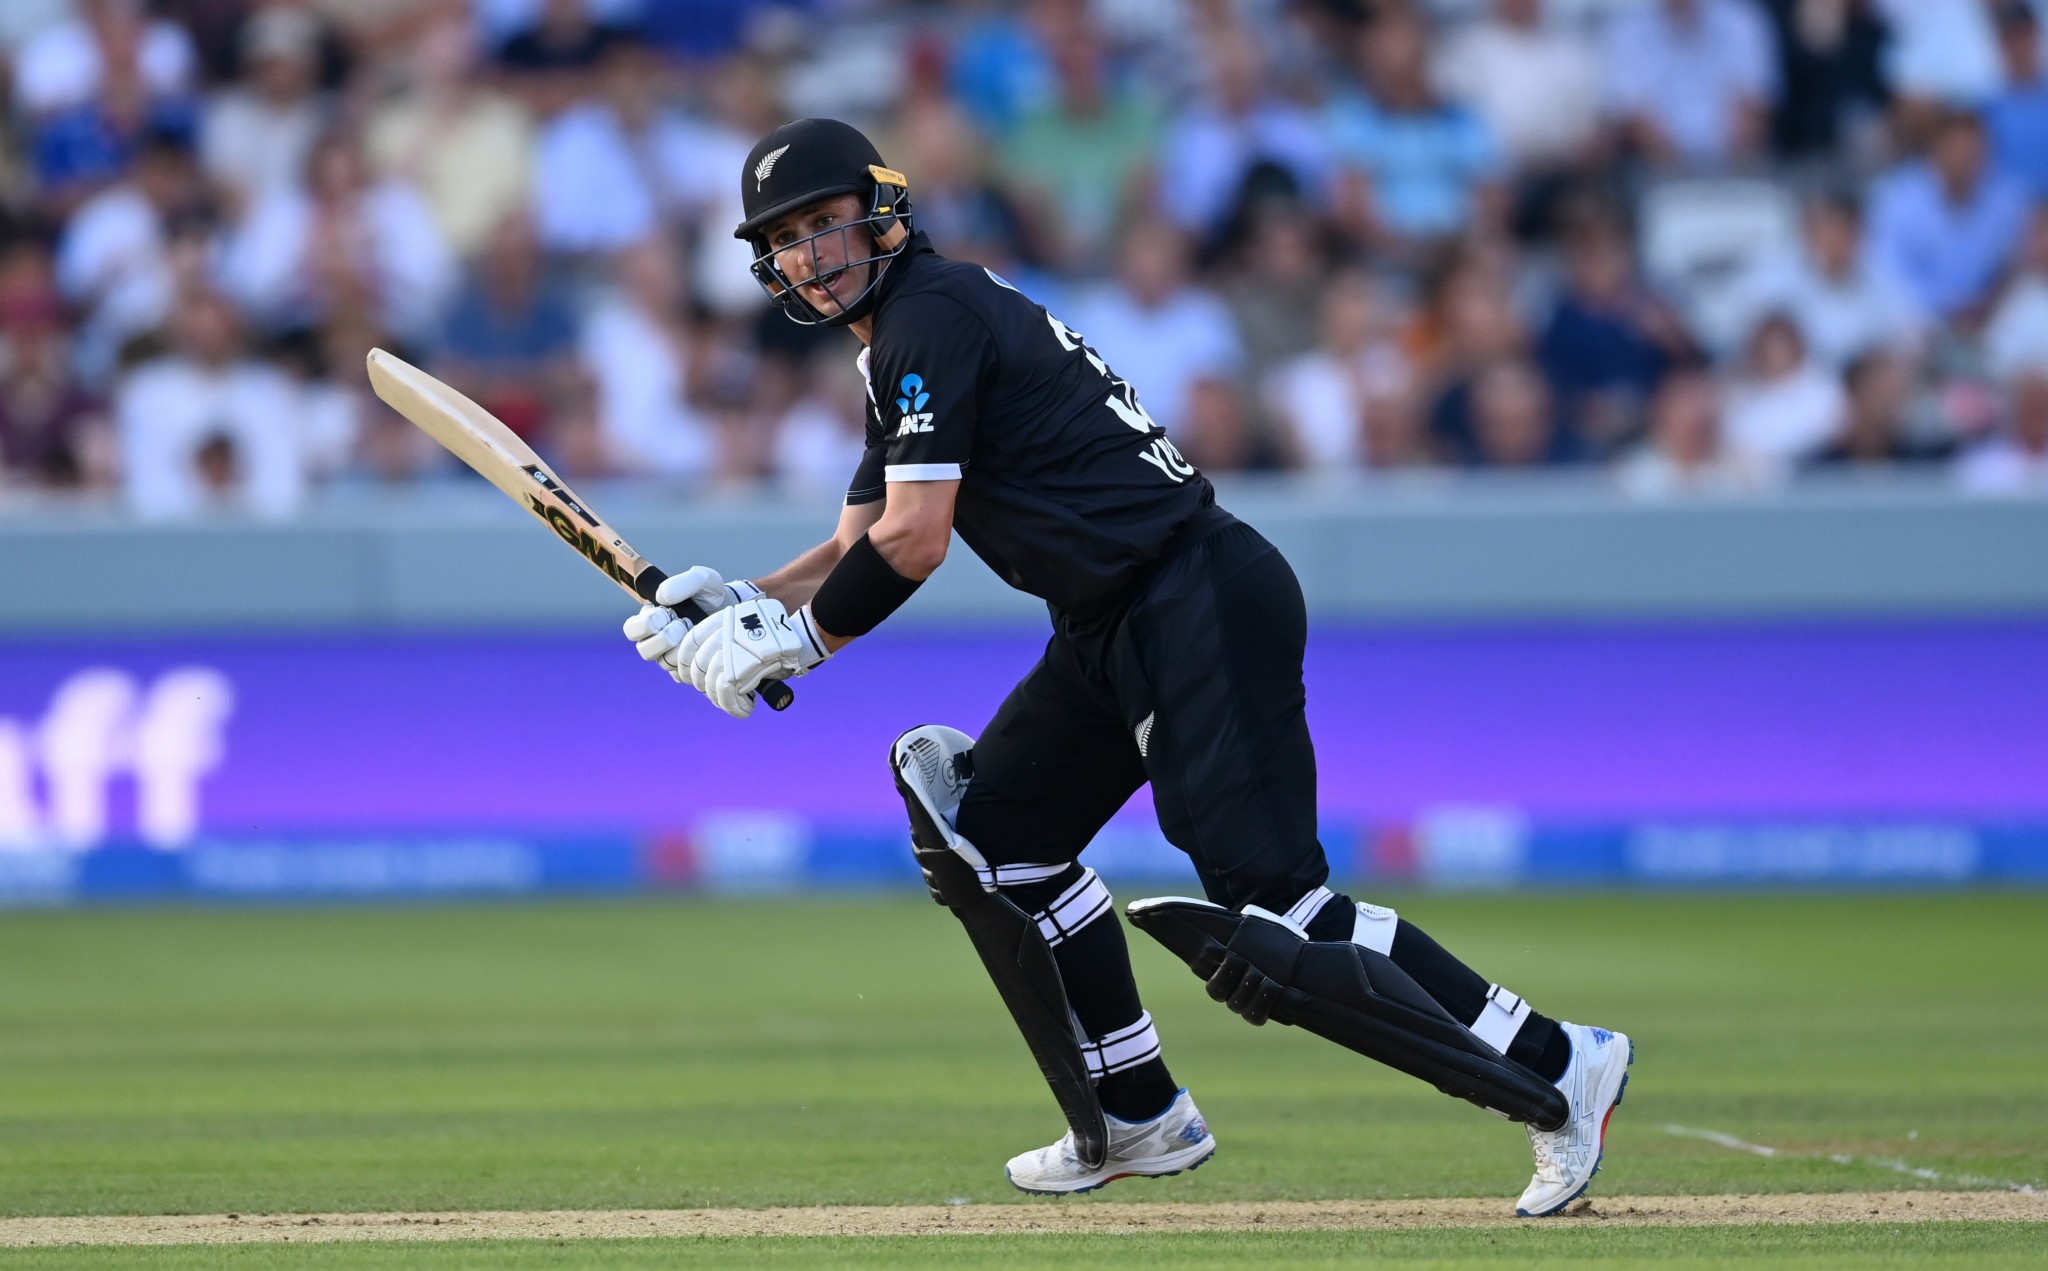 Will Young, who scored a duck in New Zealand's win over England, top scored against the Netherlands today ©Getty Images